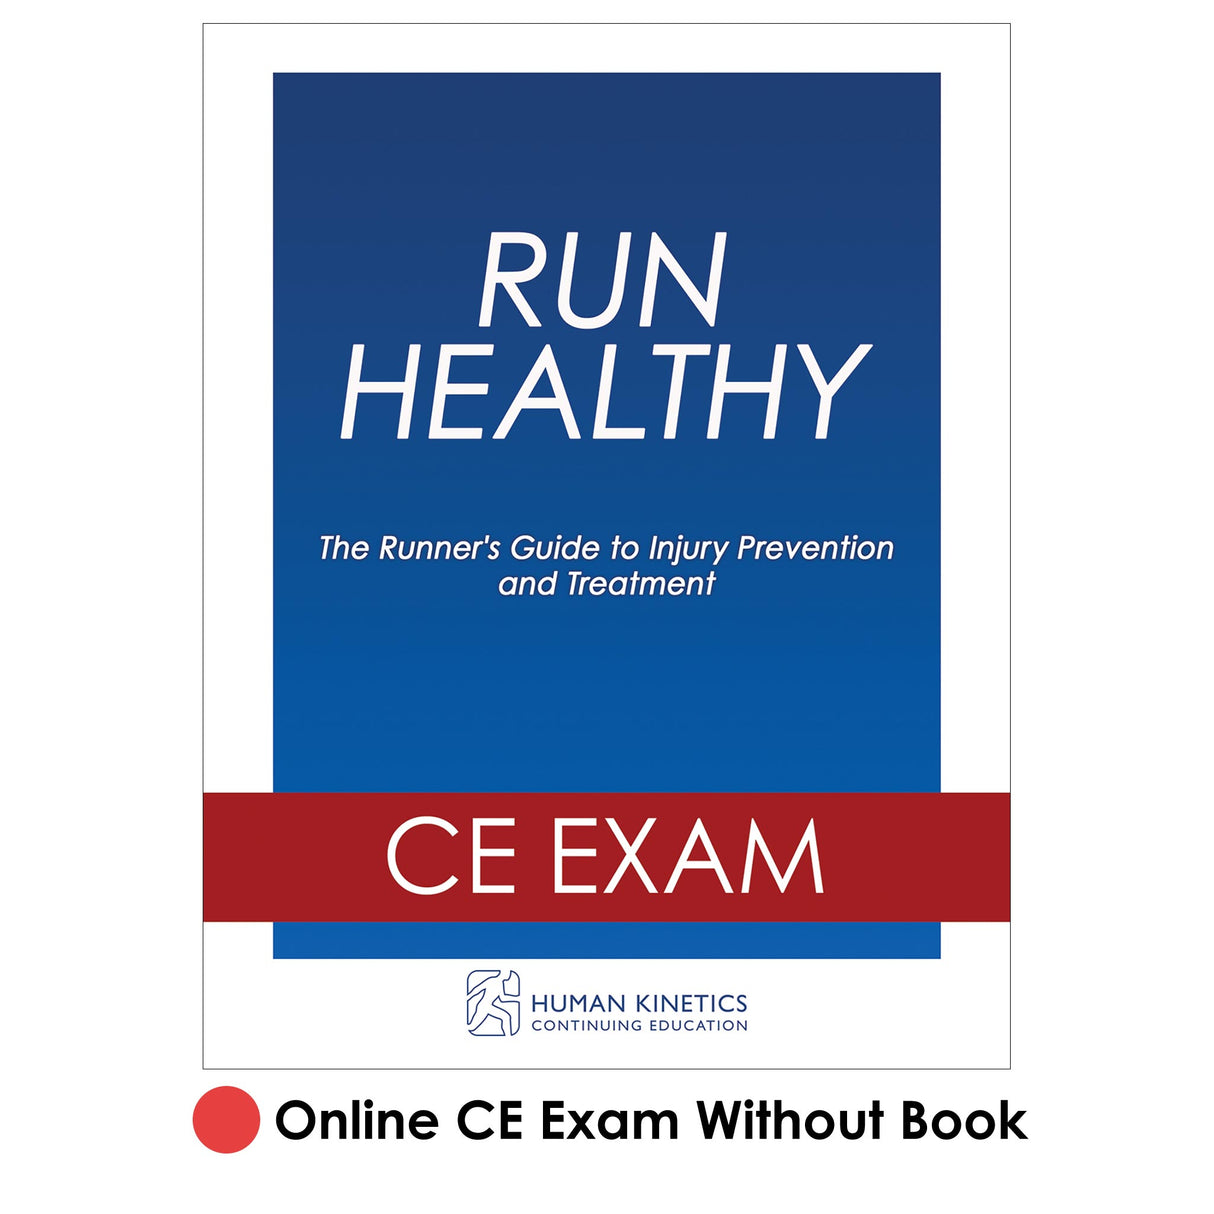 Run Healthy Online CE Exam Without Book